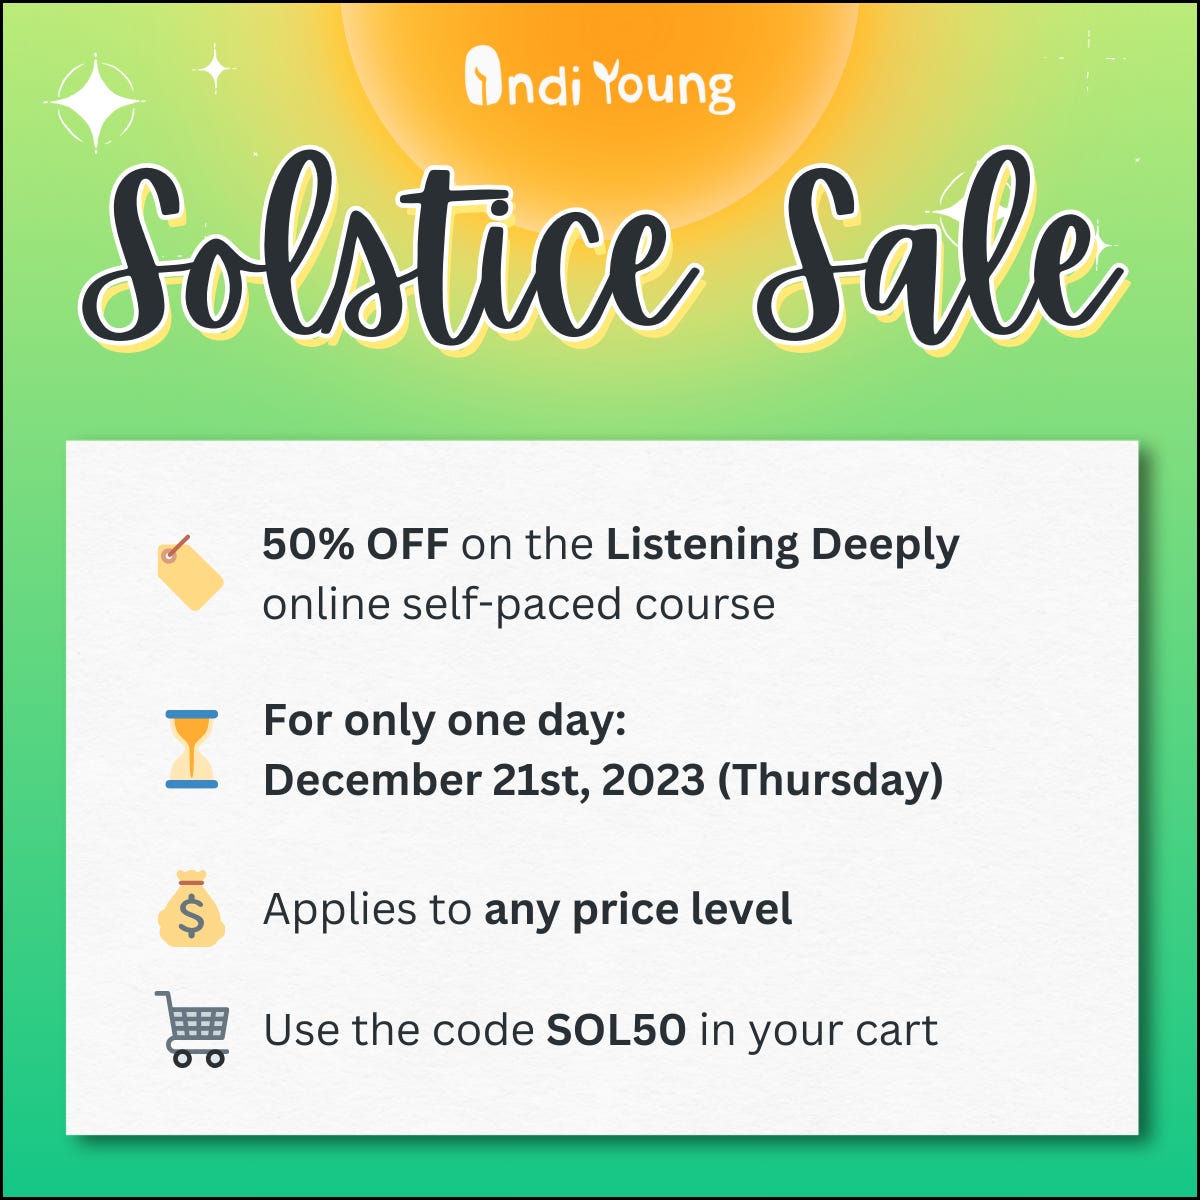 Green background with yellow sun, cursive text saying Solstice Sale, and the same points as listed in text below the image.